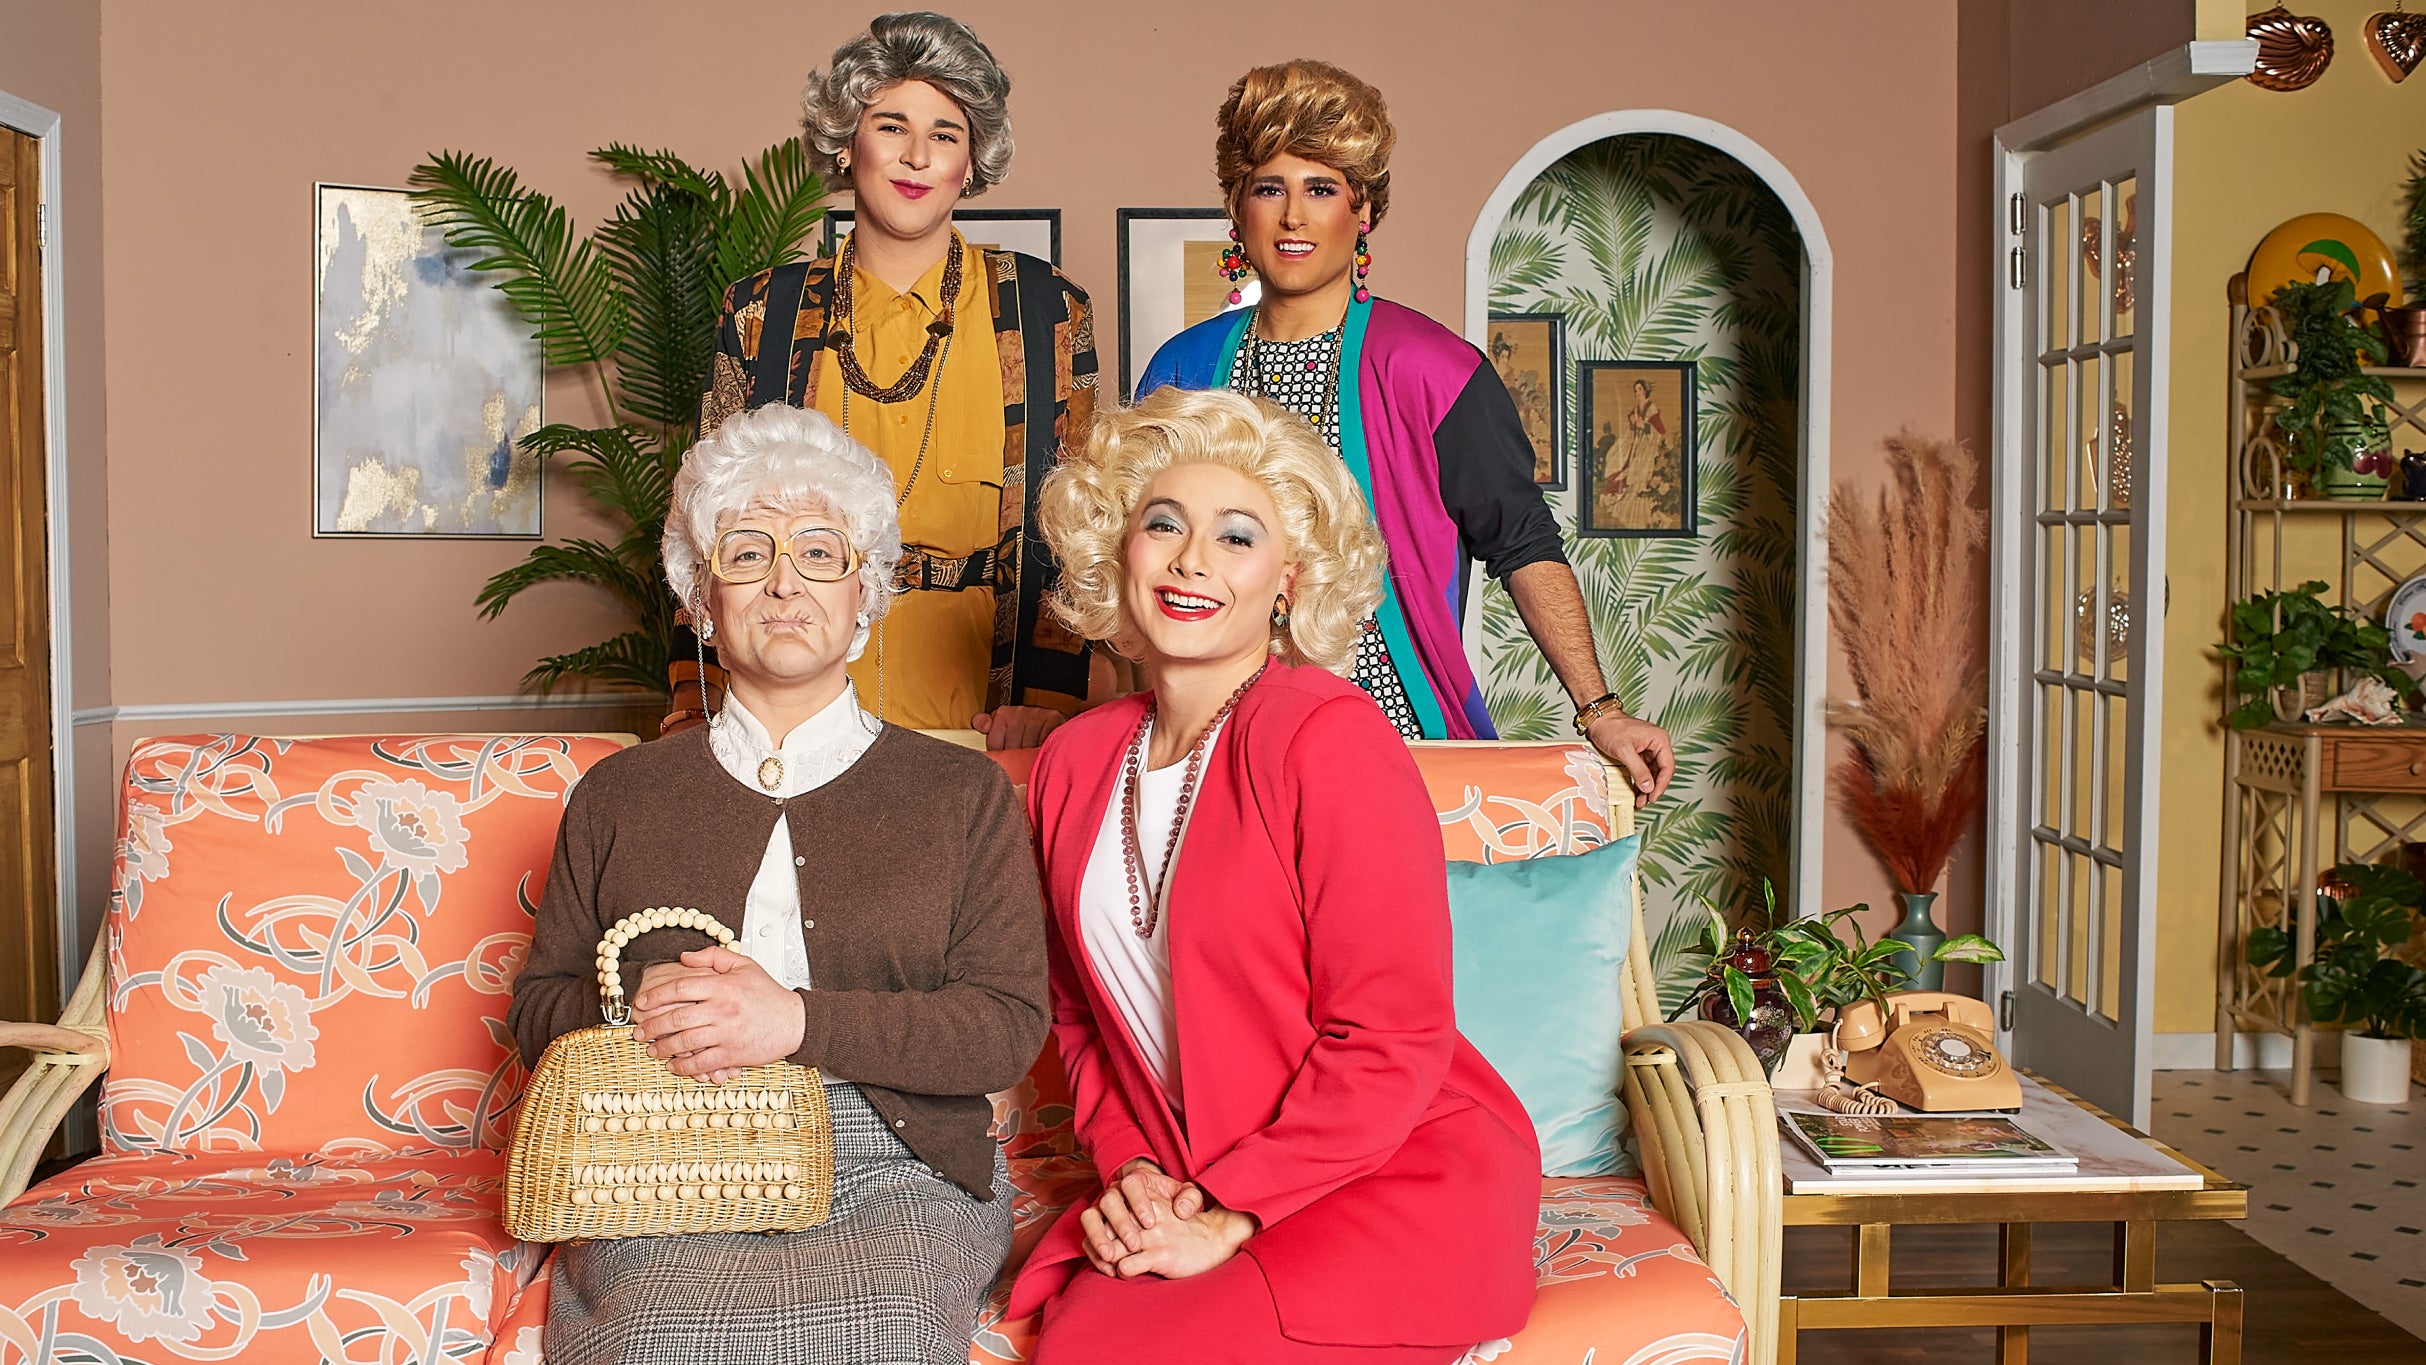 Golden Girls: The Laughs Continue (Chicago) in Chicago promo photo for Internet presale offer code